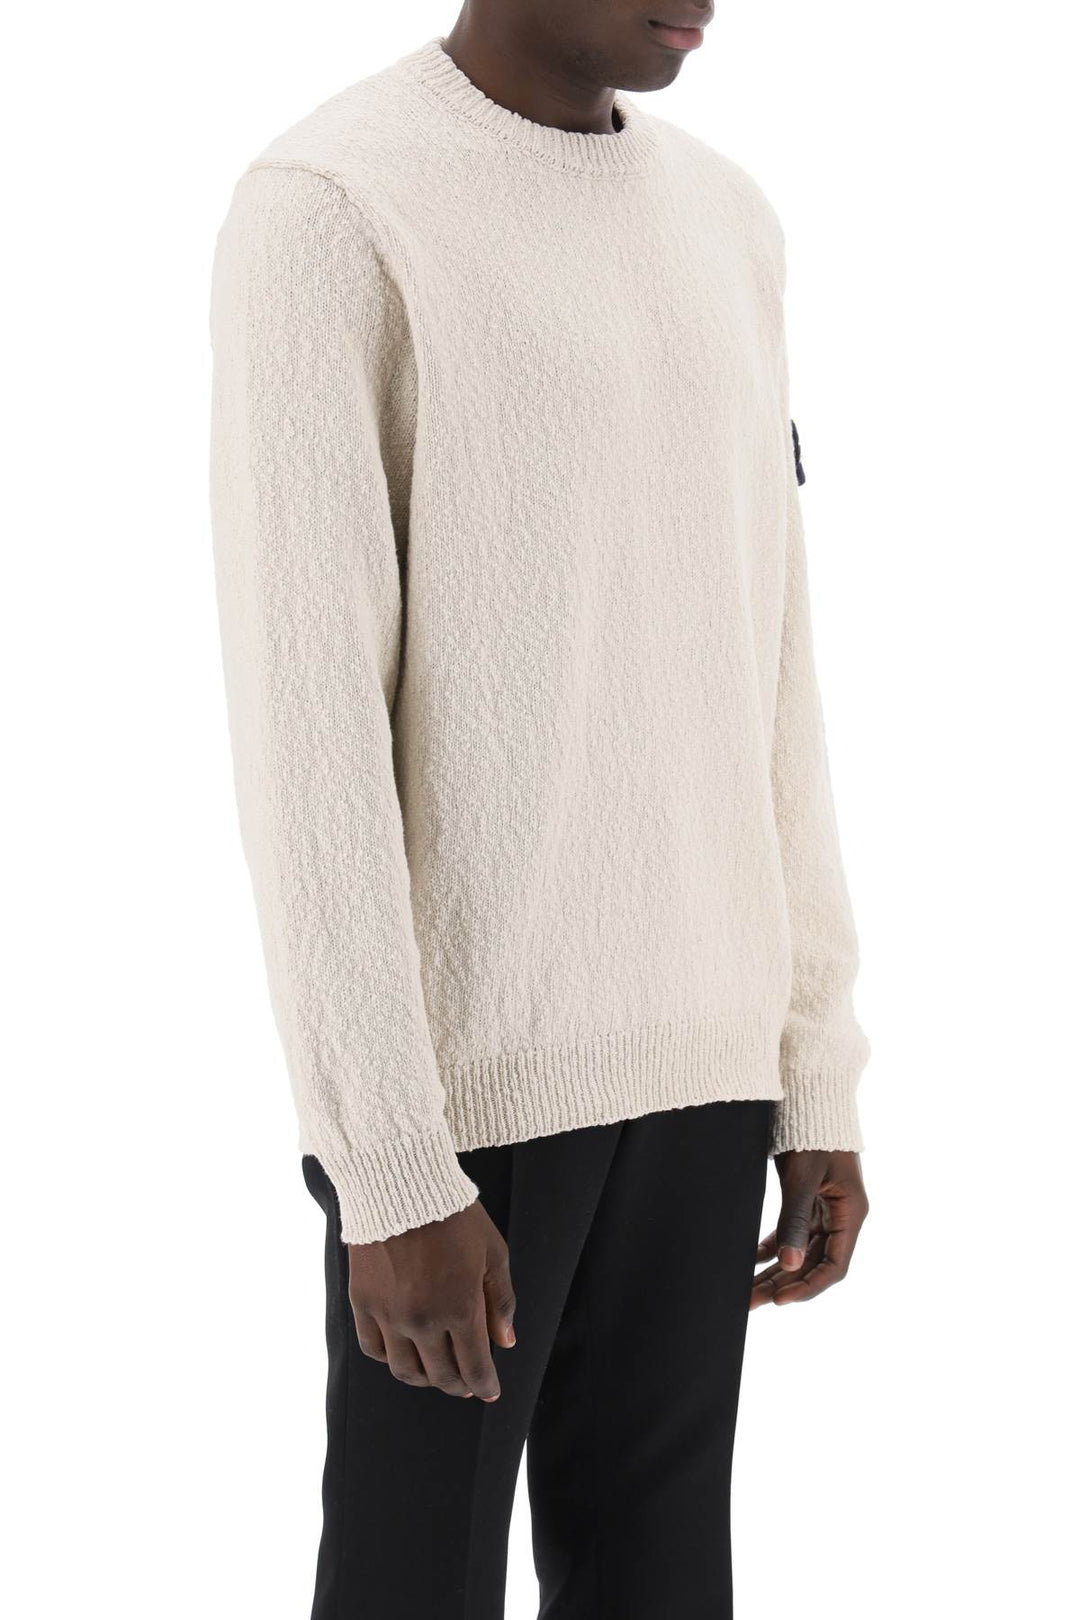 Stone Island Cotton And Linen Blend Pullover   Neutral